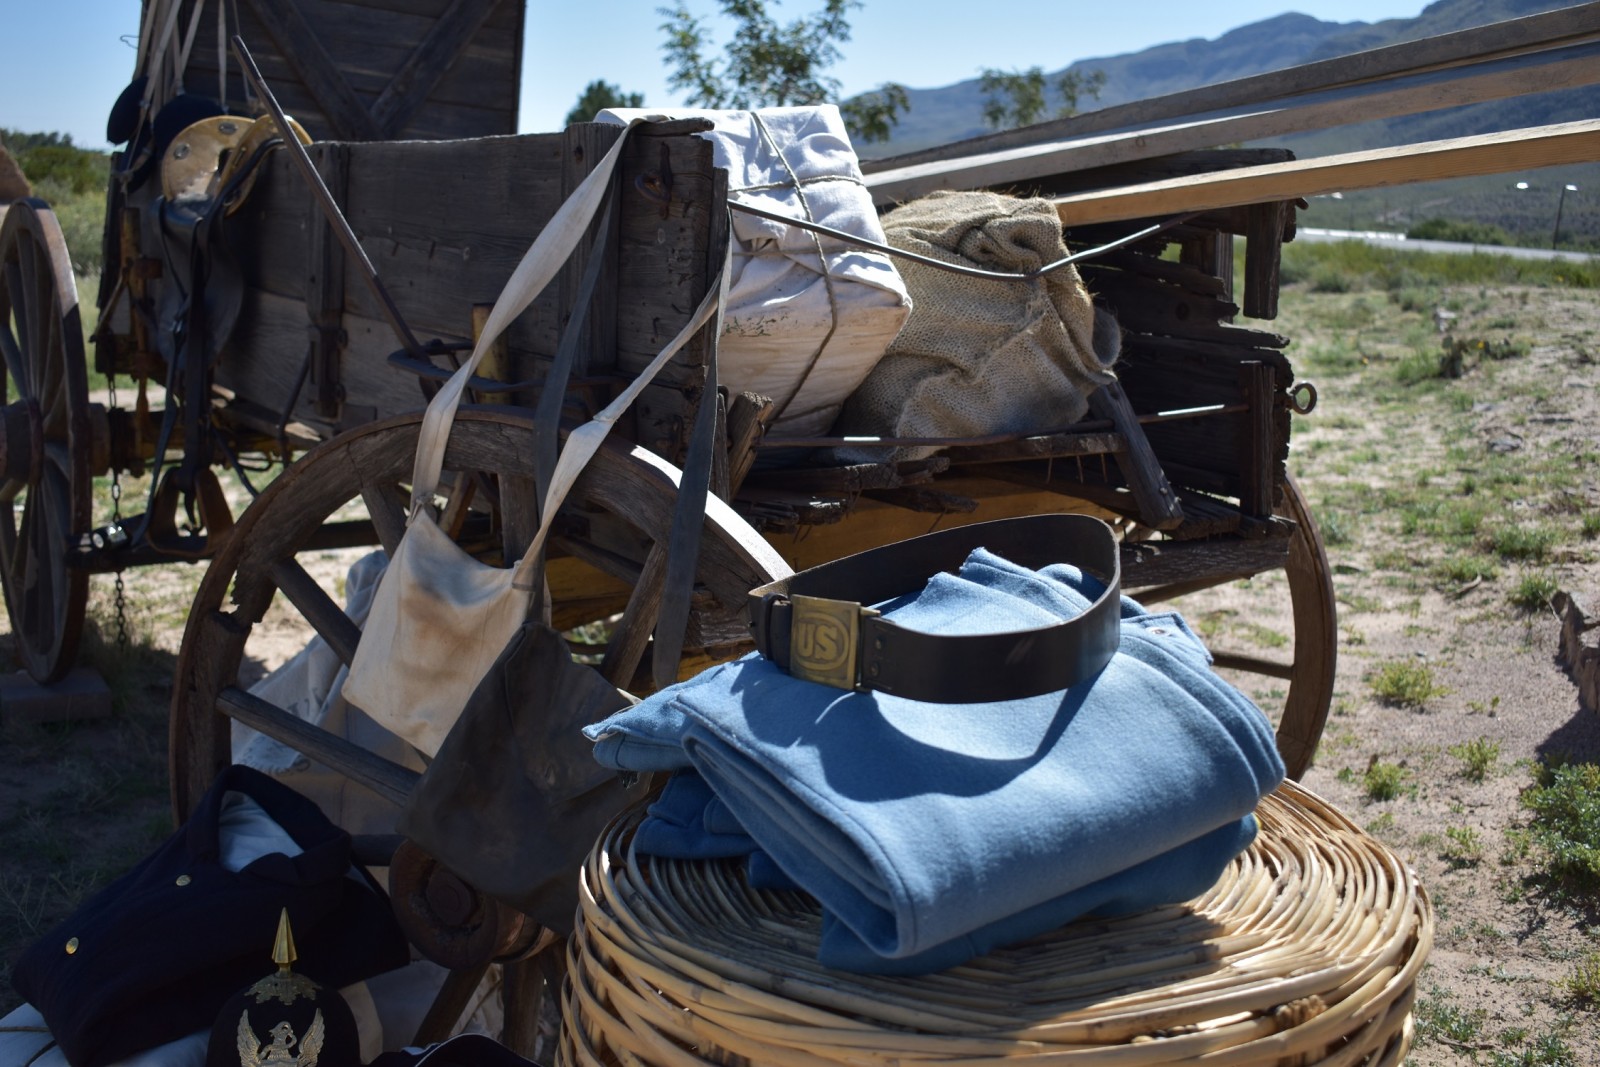 One of the historic chuckwagons at Fort Selden, displayed for Voices of the Past in 2019.